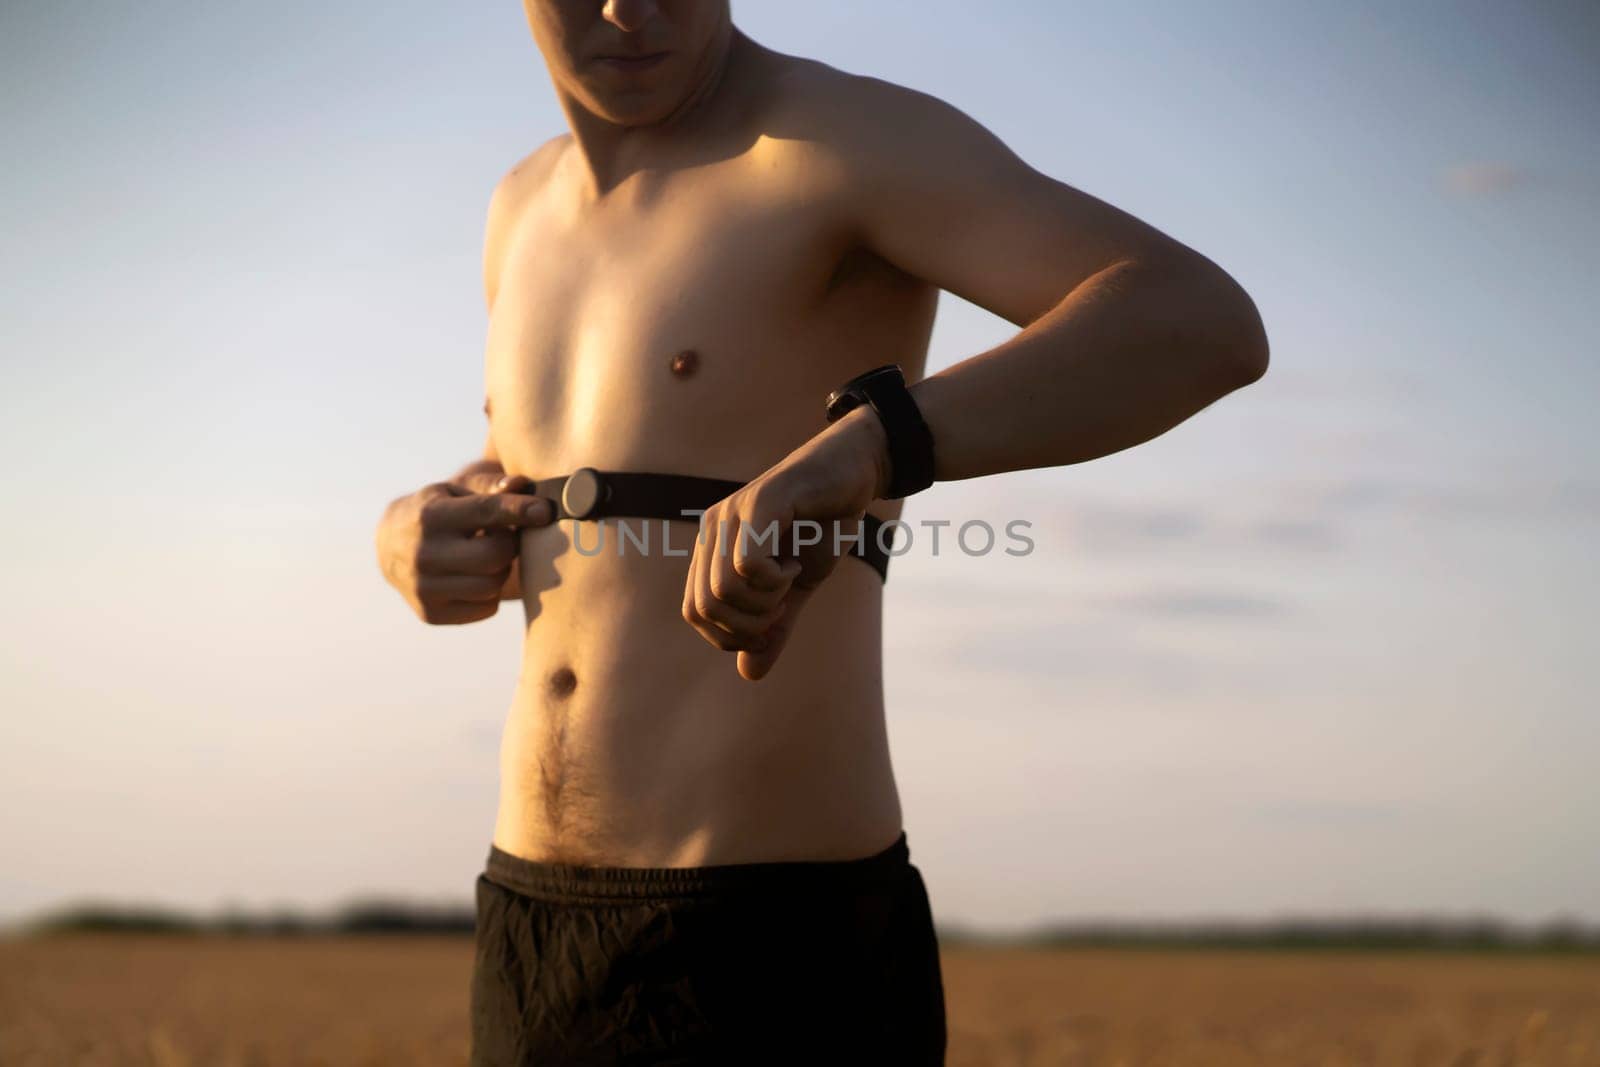 An athletic young man warms up outdoors, puts on a heart rate monitor and prepares for an active run, a person leads a healthy lifestyle and competently approaches running training.